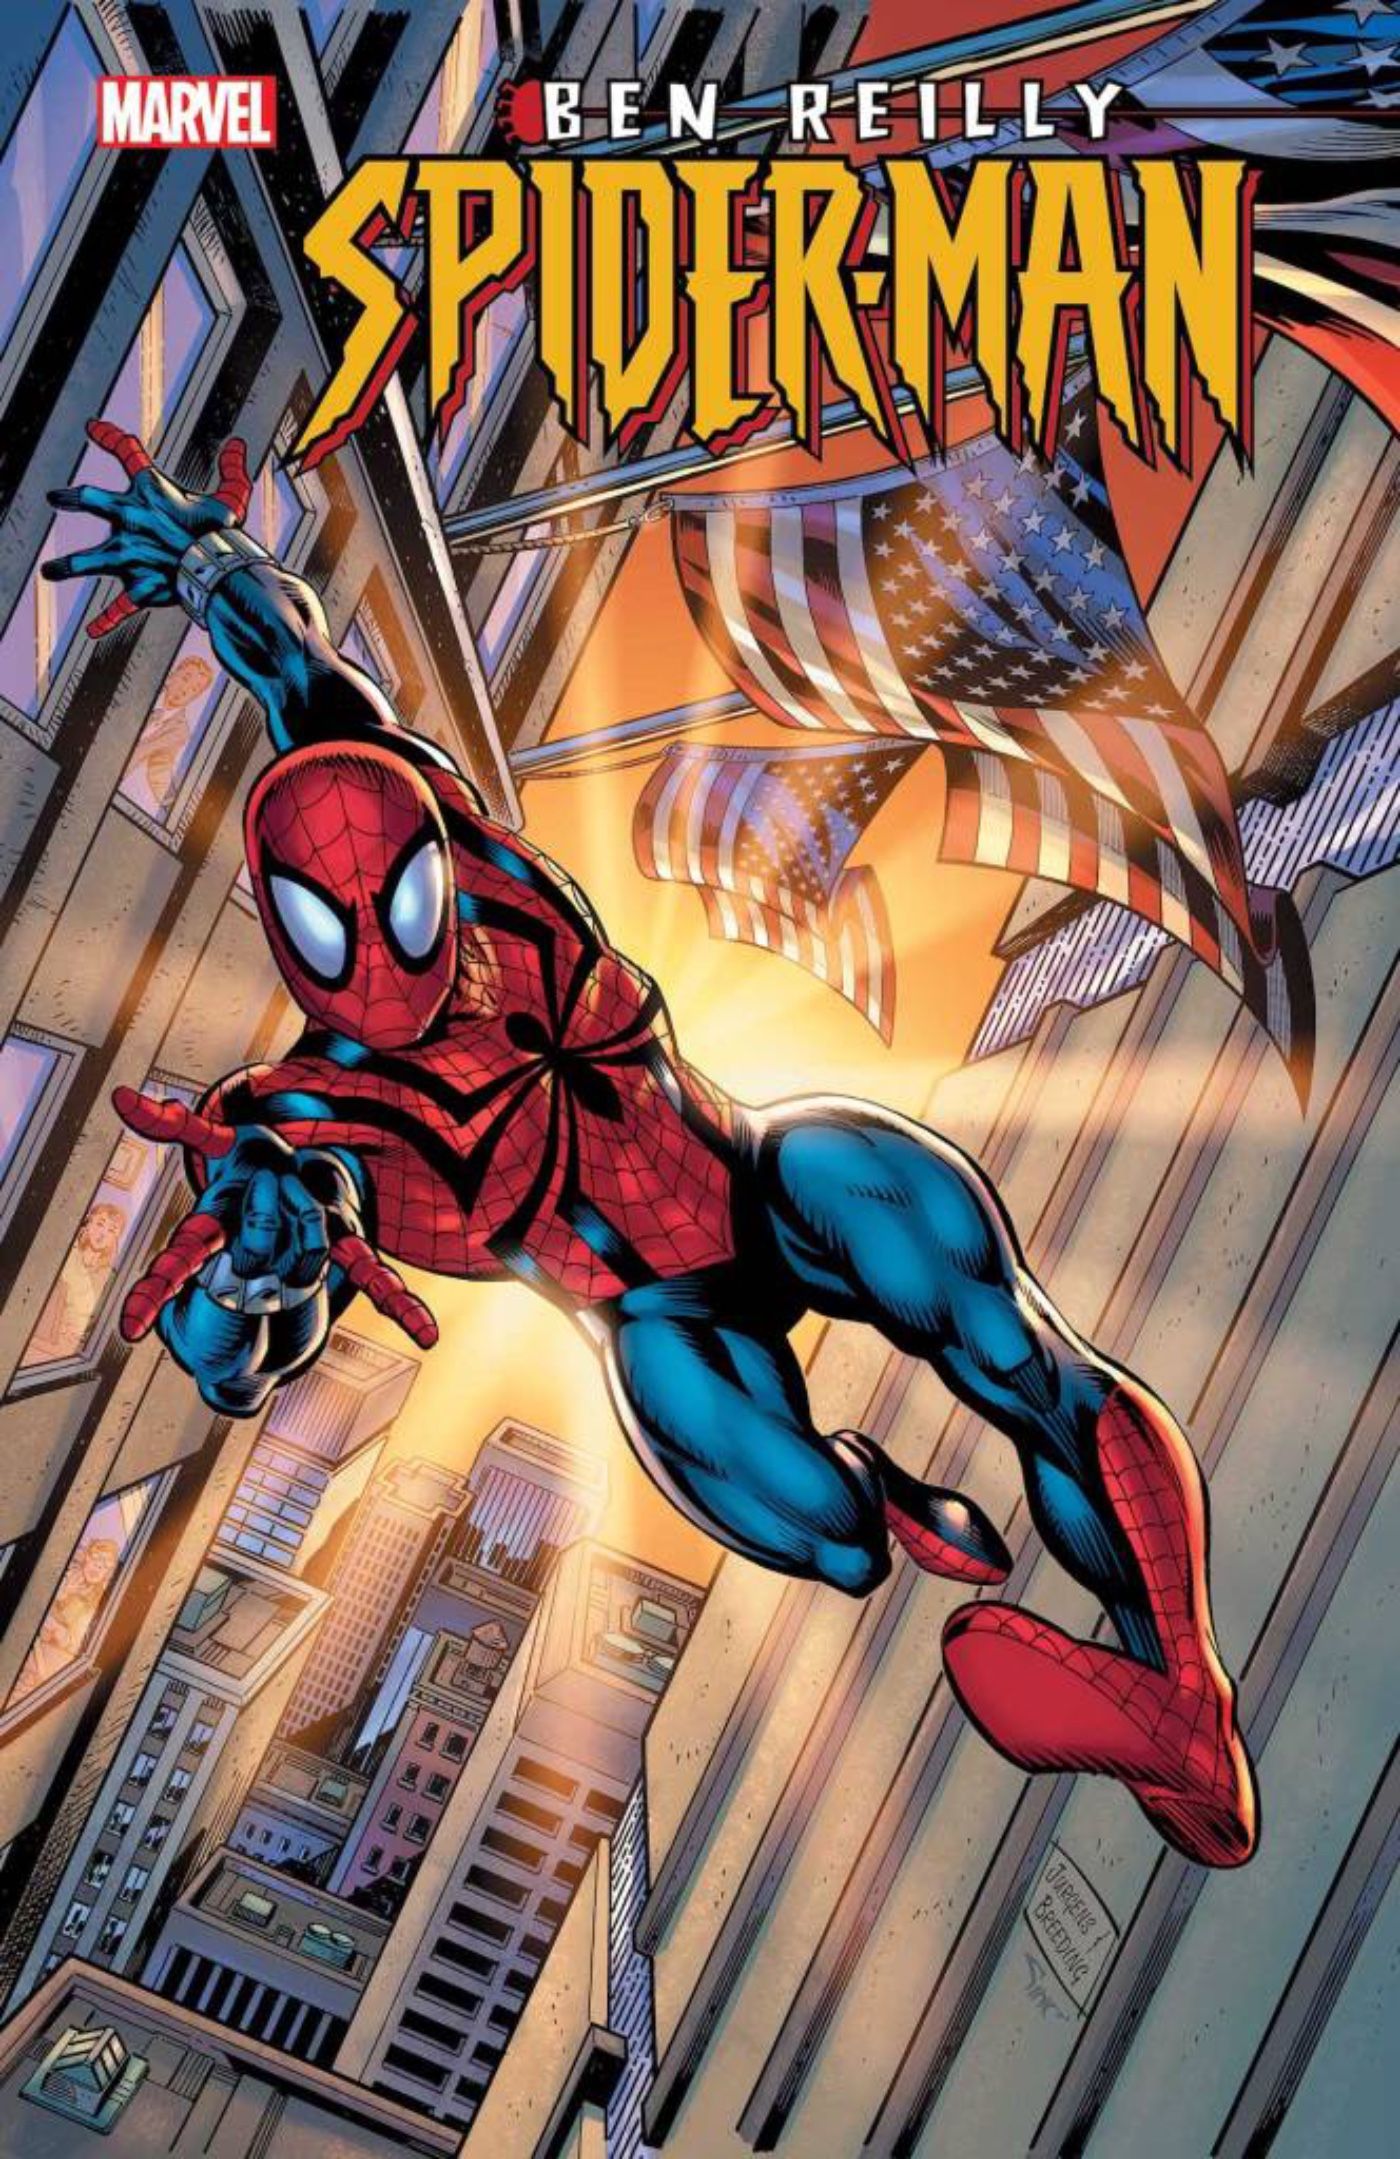 An Unused SpiderMan Design From 1995 Is Making Its Marvel Comics Debut